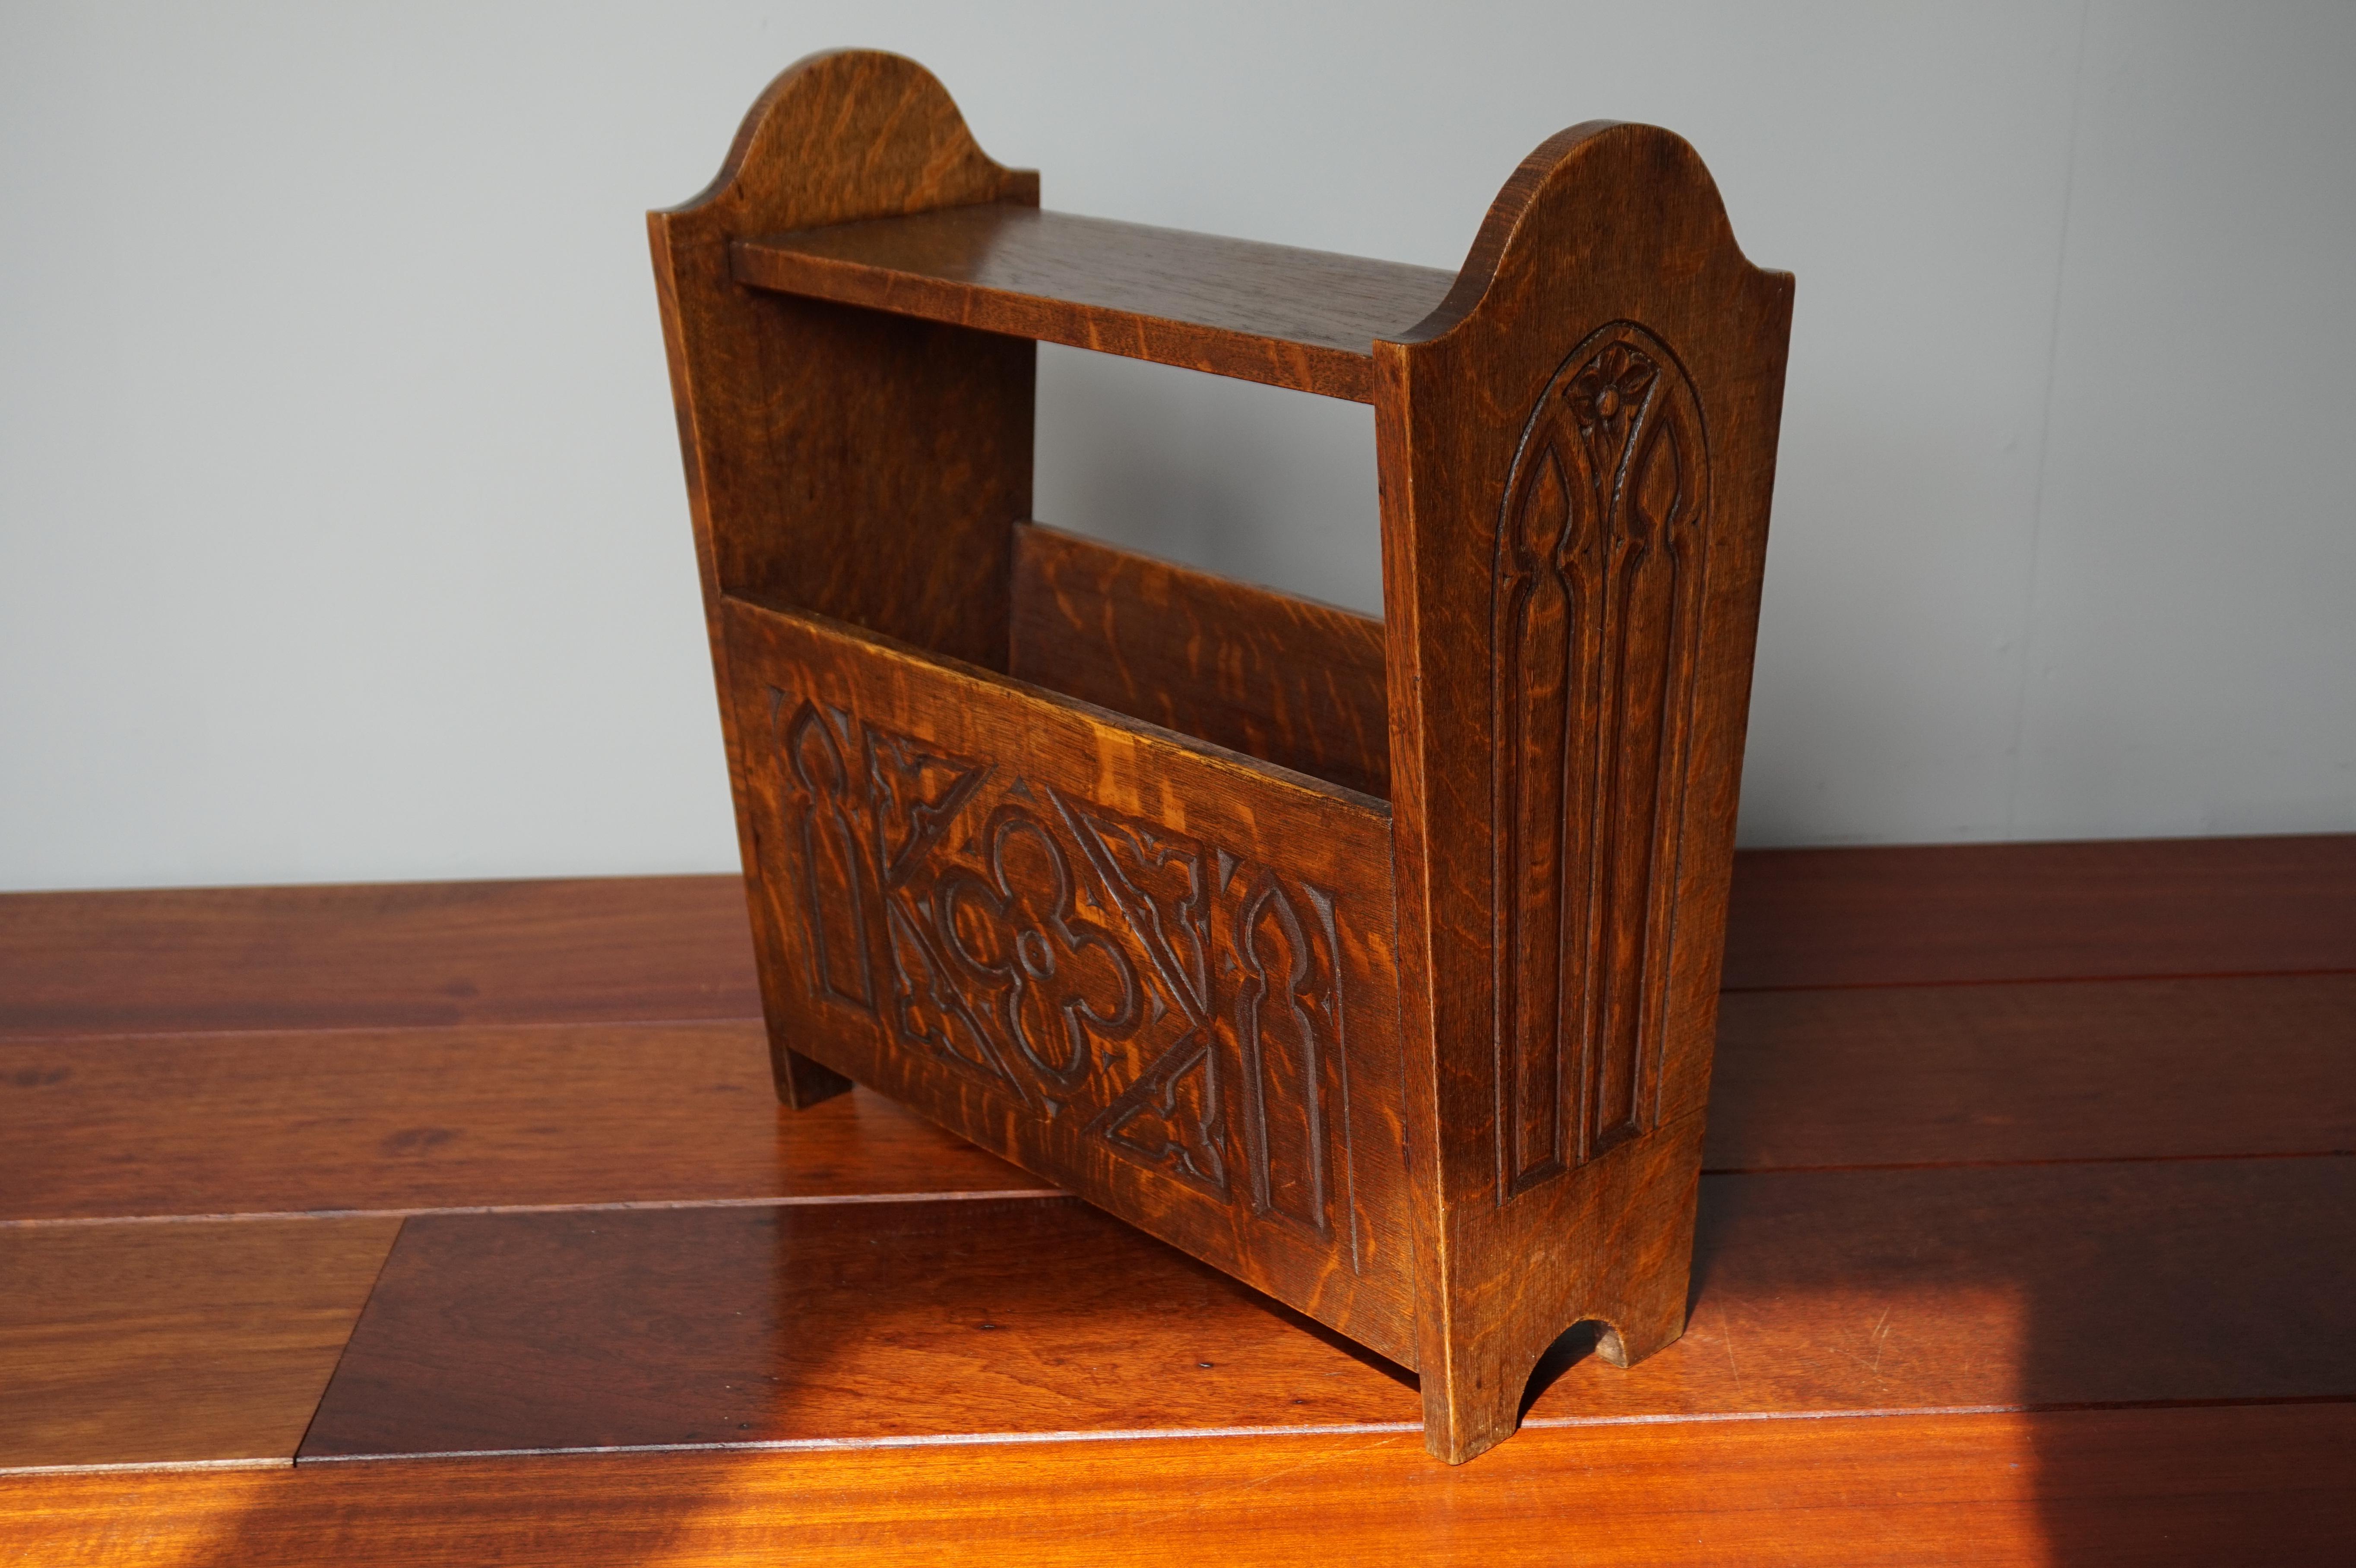 Beautiful, practical and very rare antique magazine holder.

With a combined experience of more than 30 years in the antiques trade we had never seen a Gothic revival magazine and newspaper stand. To have found one in this museum worthy condition